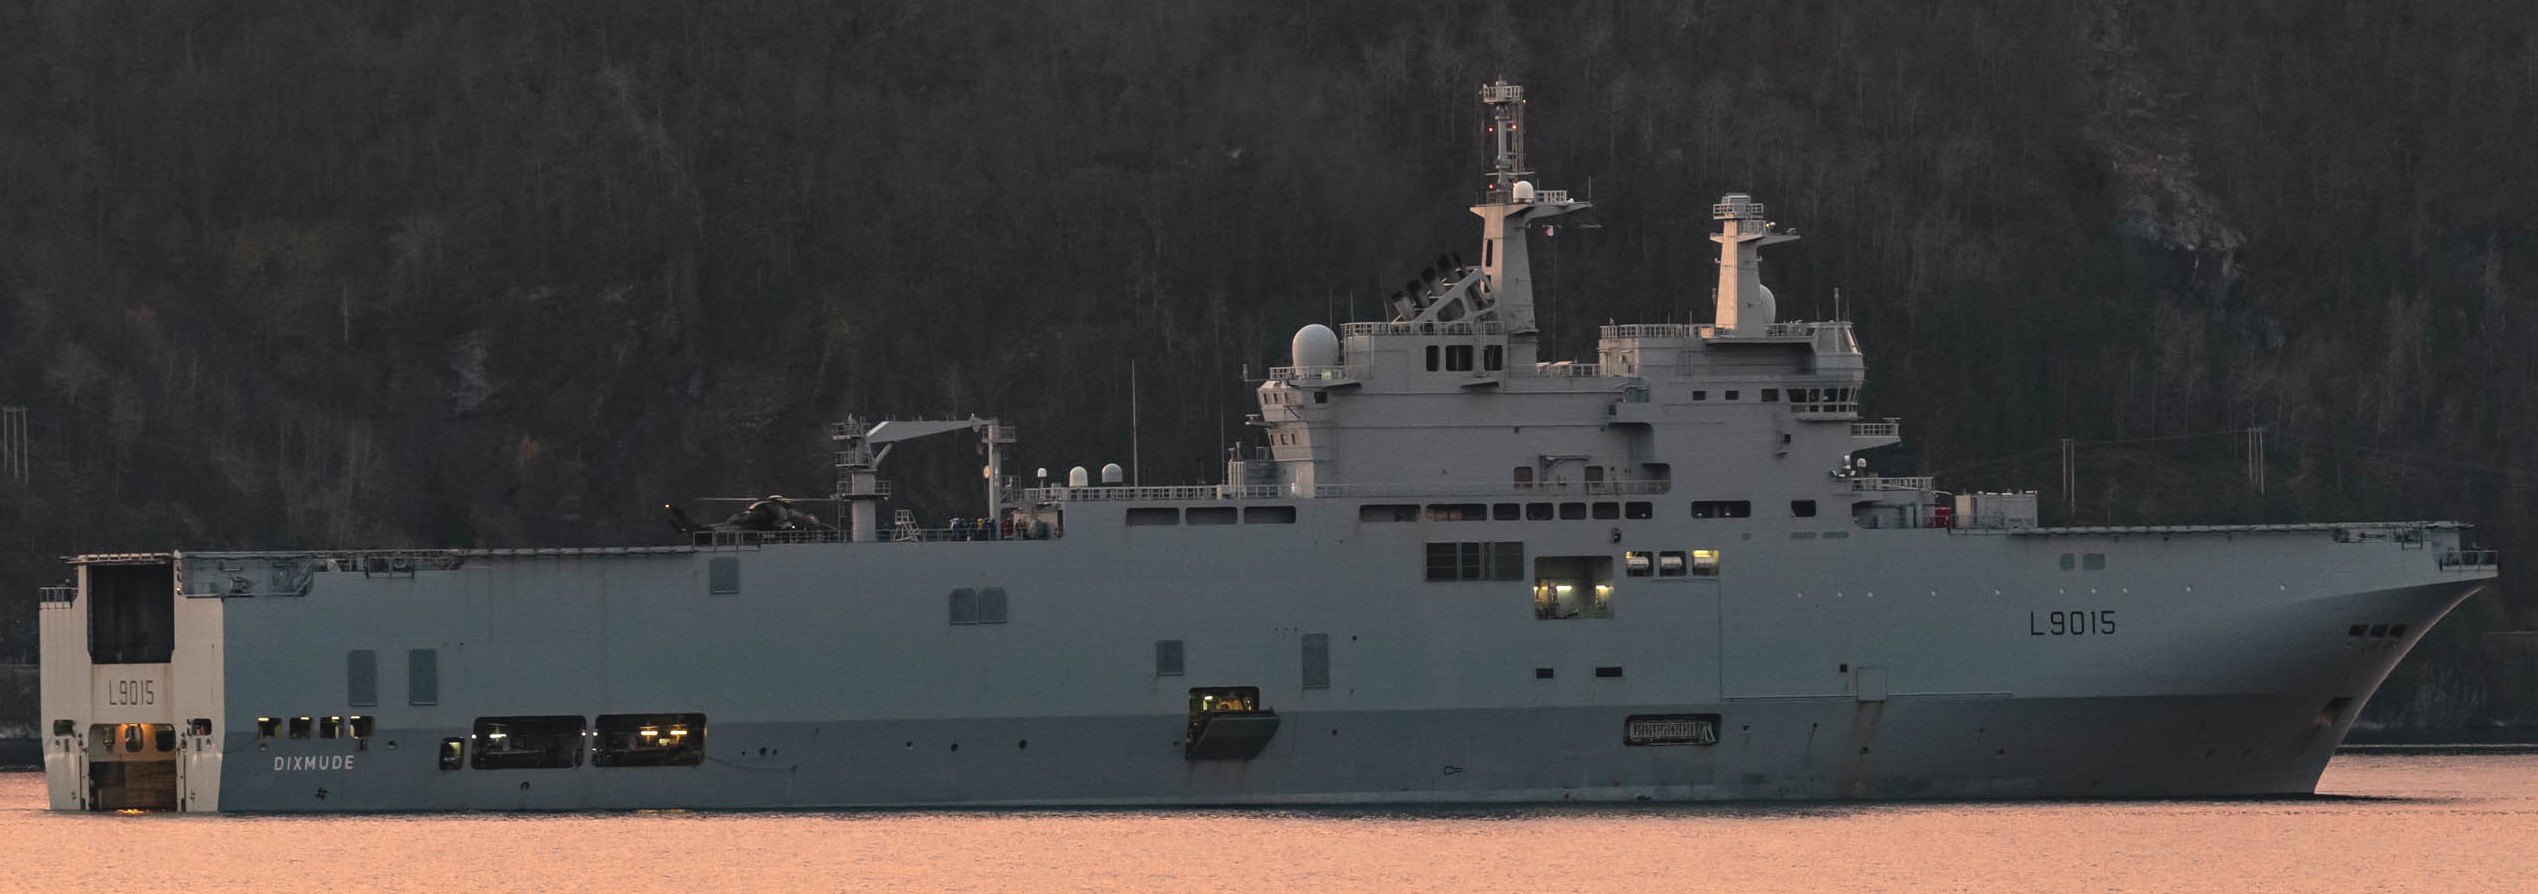 l-9015 fs dixmude mistral class amphibious assault command ship bpc french navy marine nationale 59